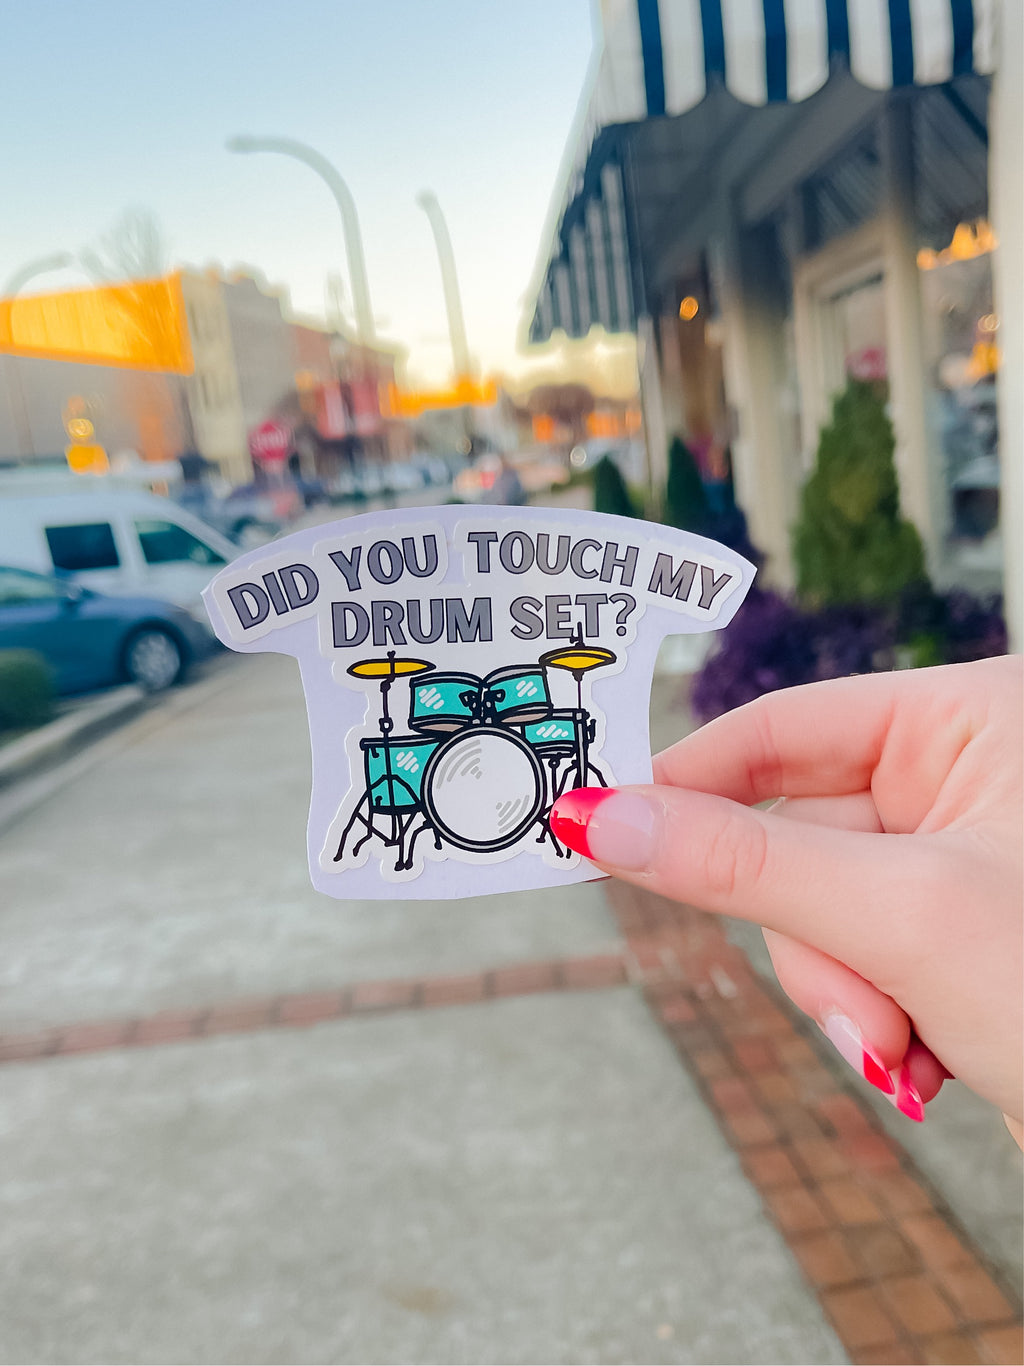 Did you touch my drum set?  Design approx. 3.5"-L x 2.5"-W  Durable Laminate Vinyl  Laminate vinyl is weatherproof and protects from rain and sunlight, as well as scratching  Put these vinyl stickers on drinkware, laptops, notebooks, etc!